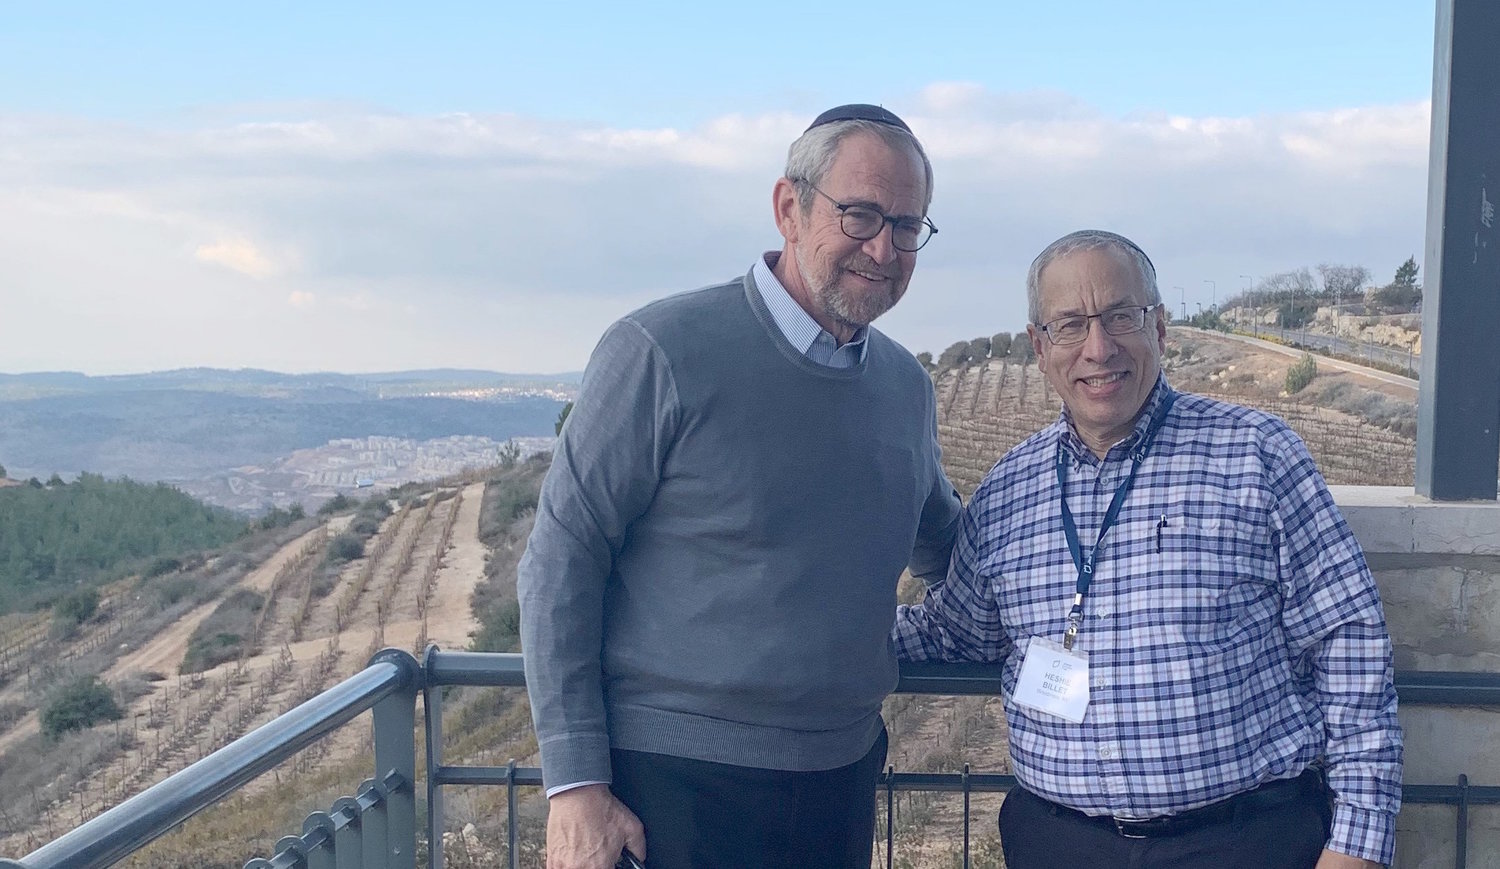 Rabbis Kenneth Hain (left) and Hershel Billet overlook the Judean Hills at the Three Boys Promenade in Gush Etzion, built in memory of the three yeshiva students killed in 2014.